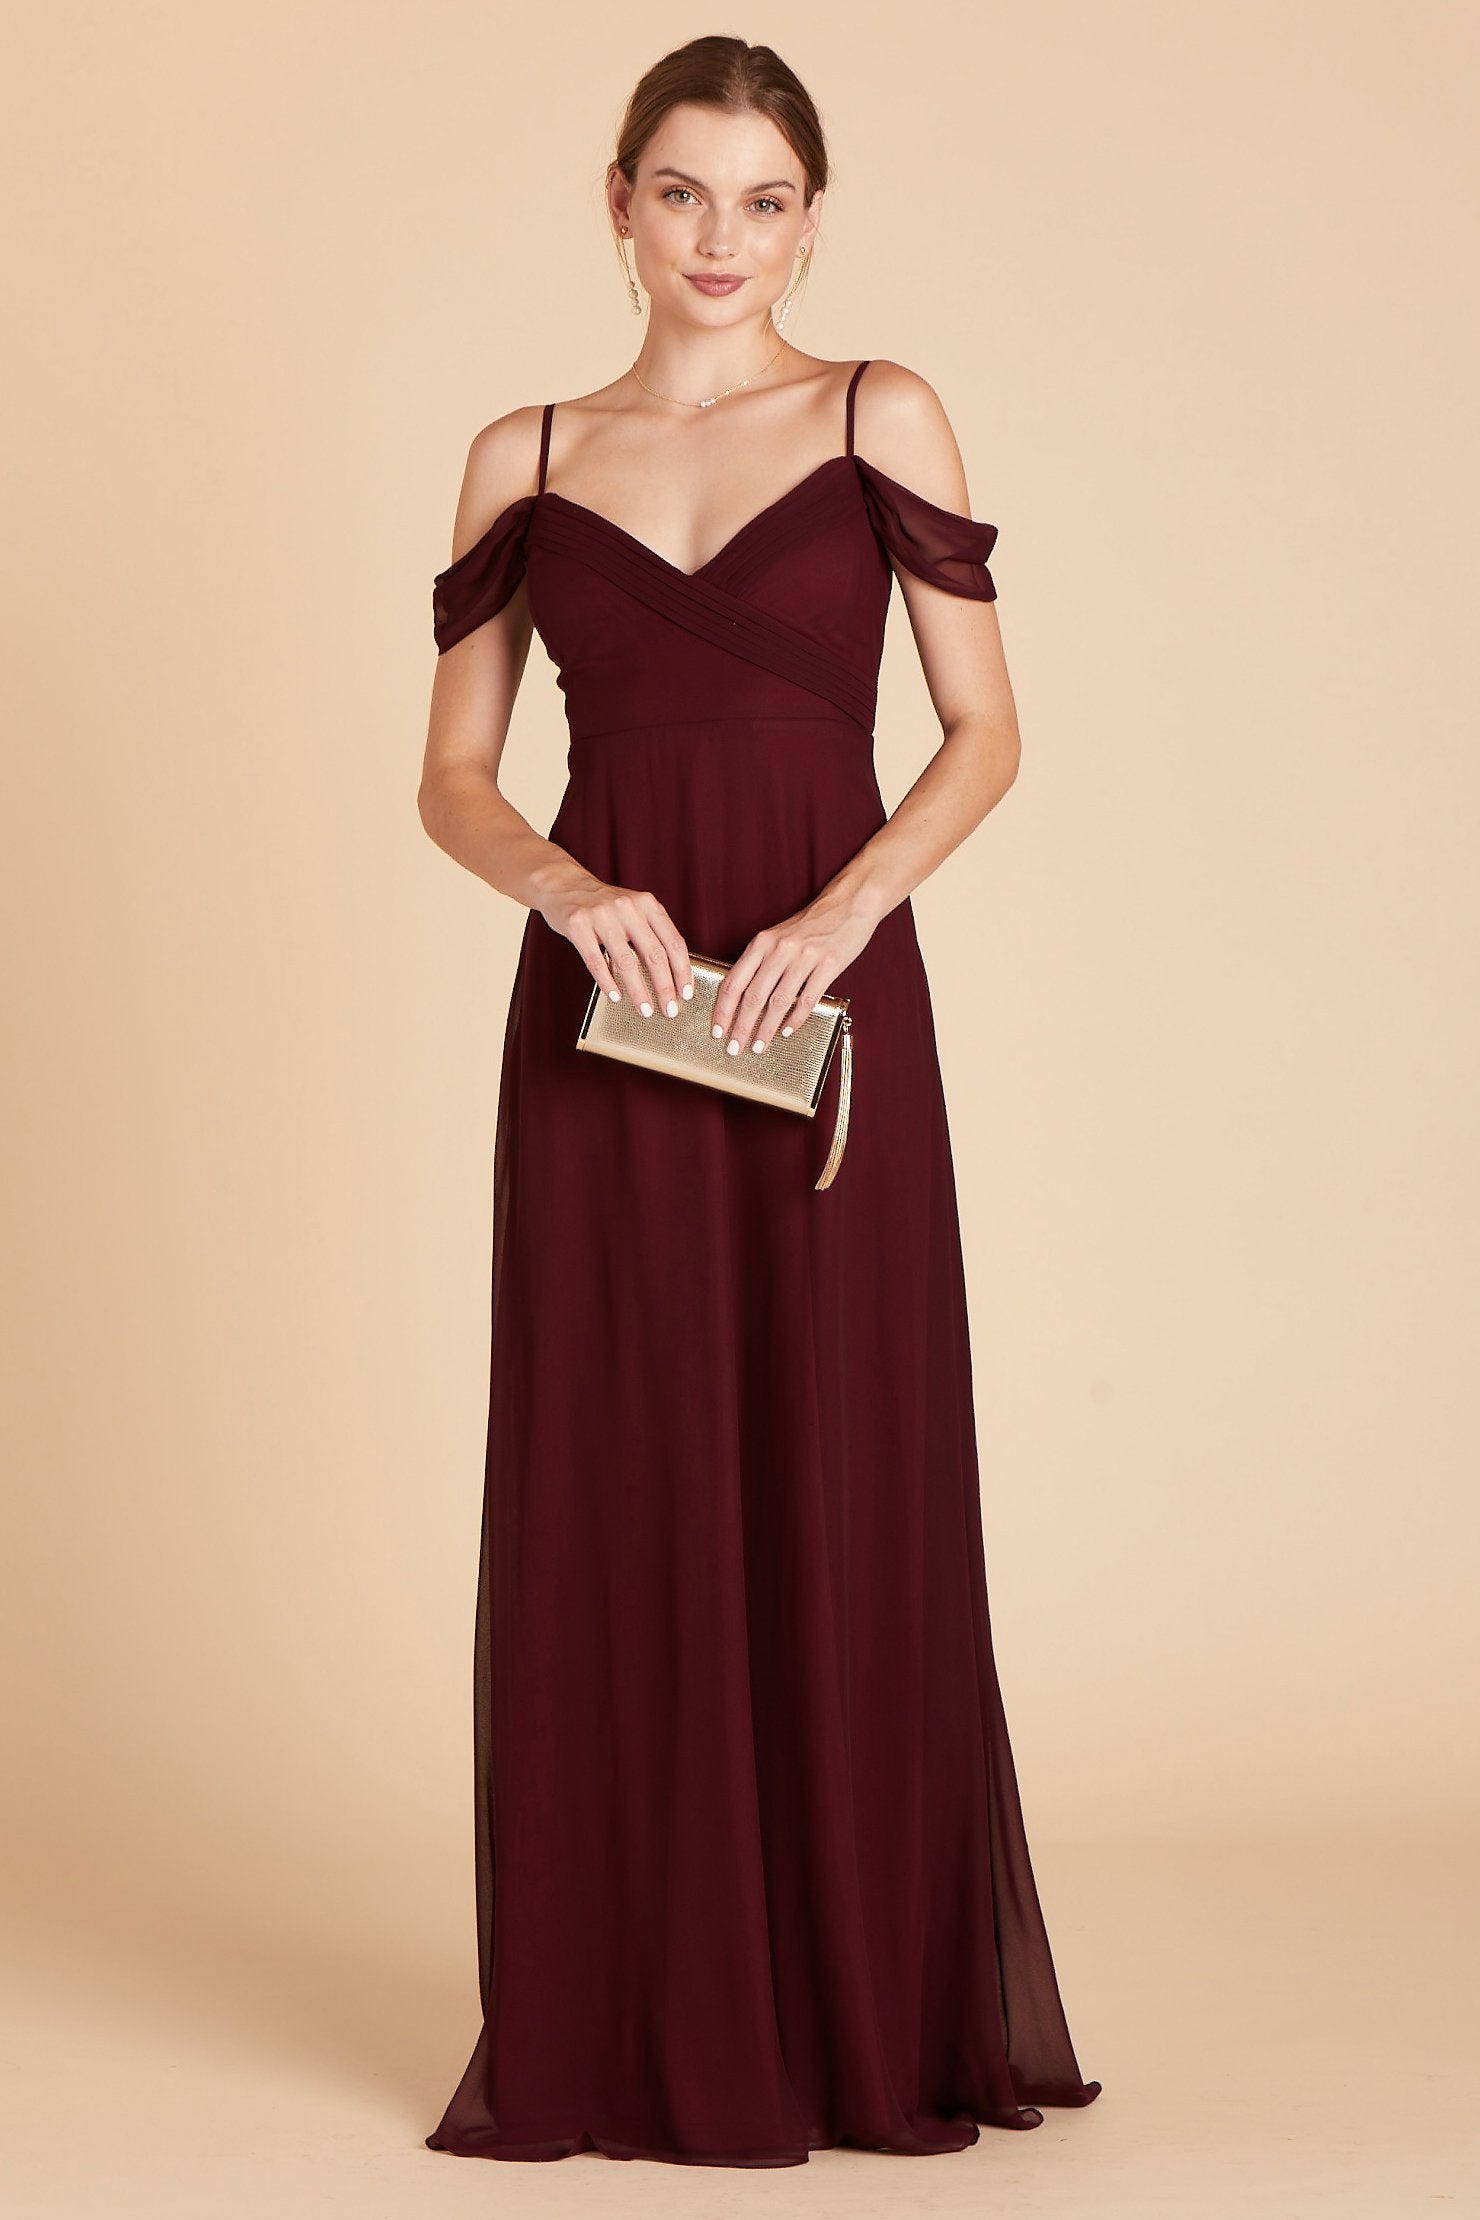 Spence convertible bridesmaid dress in cabernet burgundy chiffon by Birdy Grey, front view